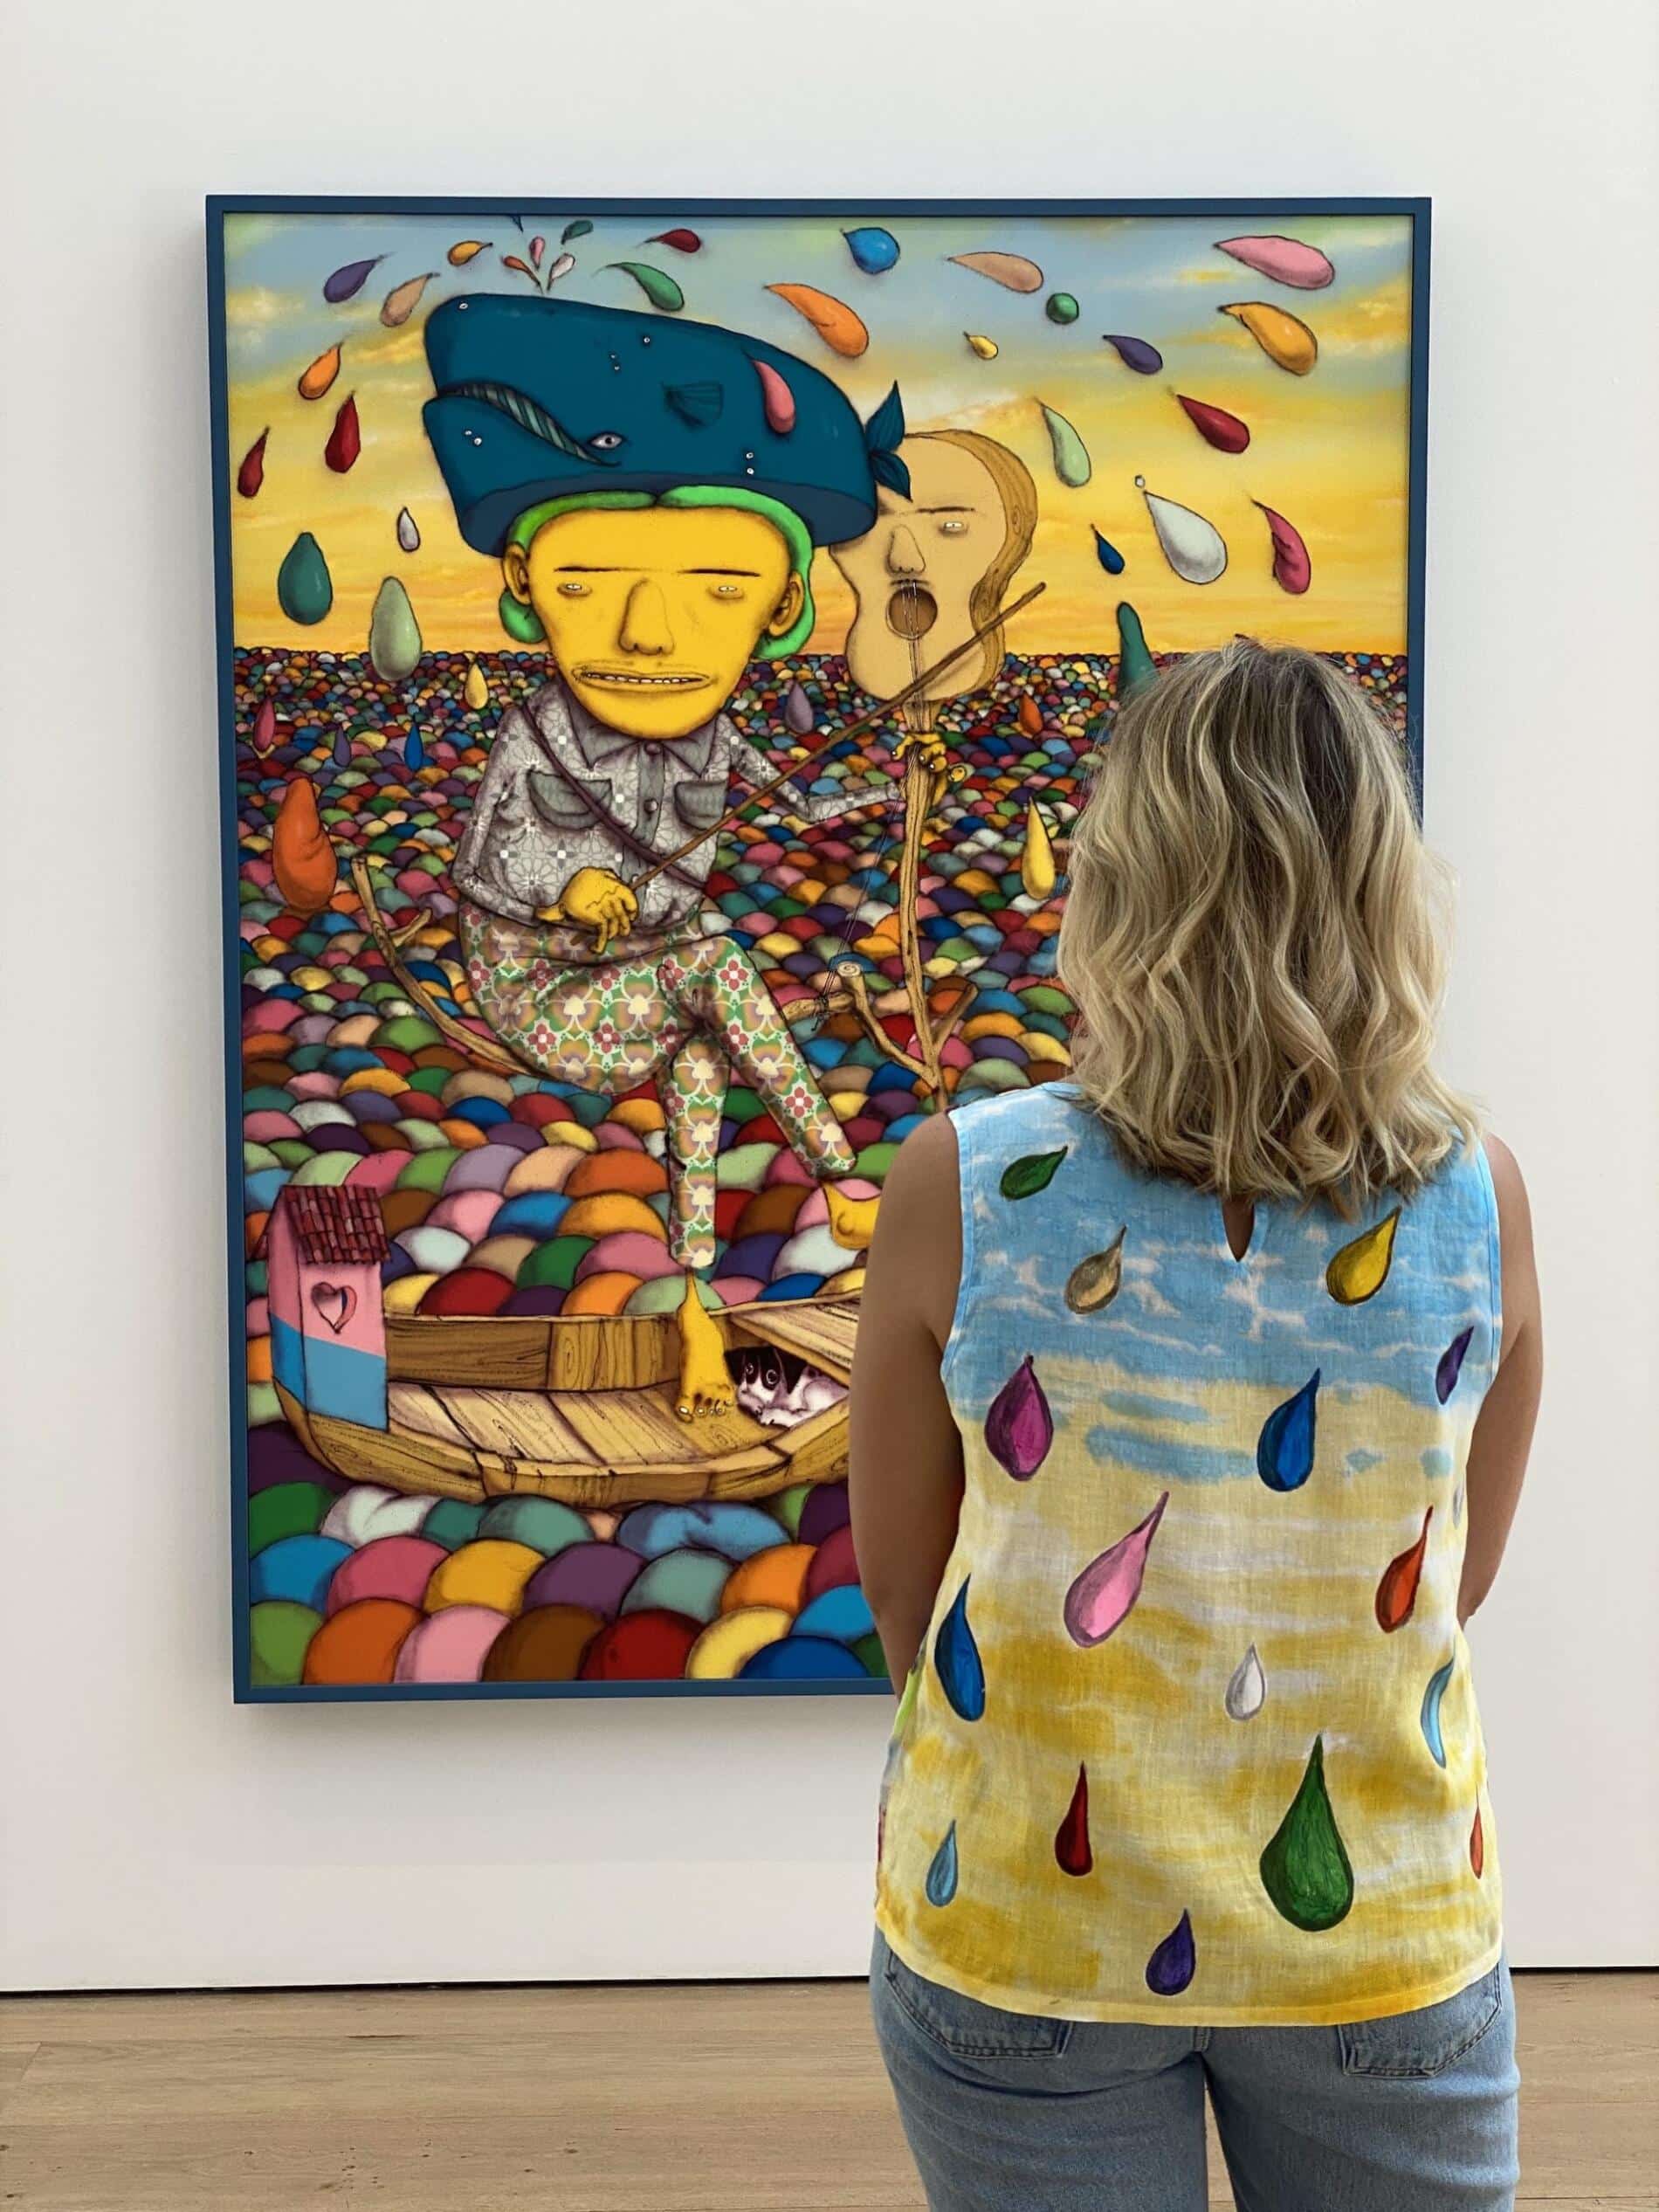 Top inspired by OSGEMEOS exhibition Portal at Lehmann Maupin Gallery. Image by Will Sealy